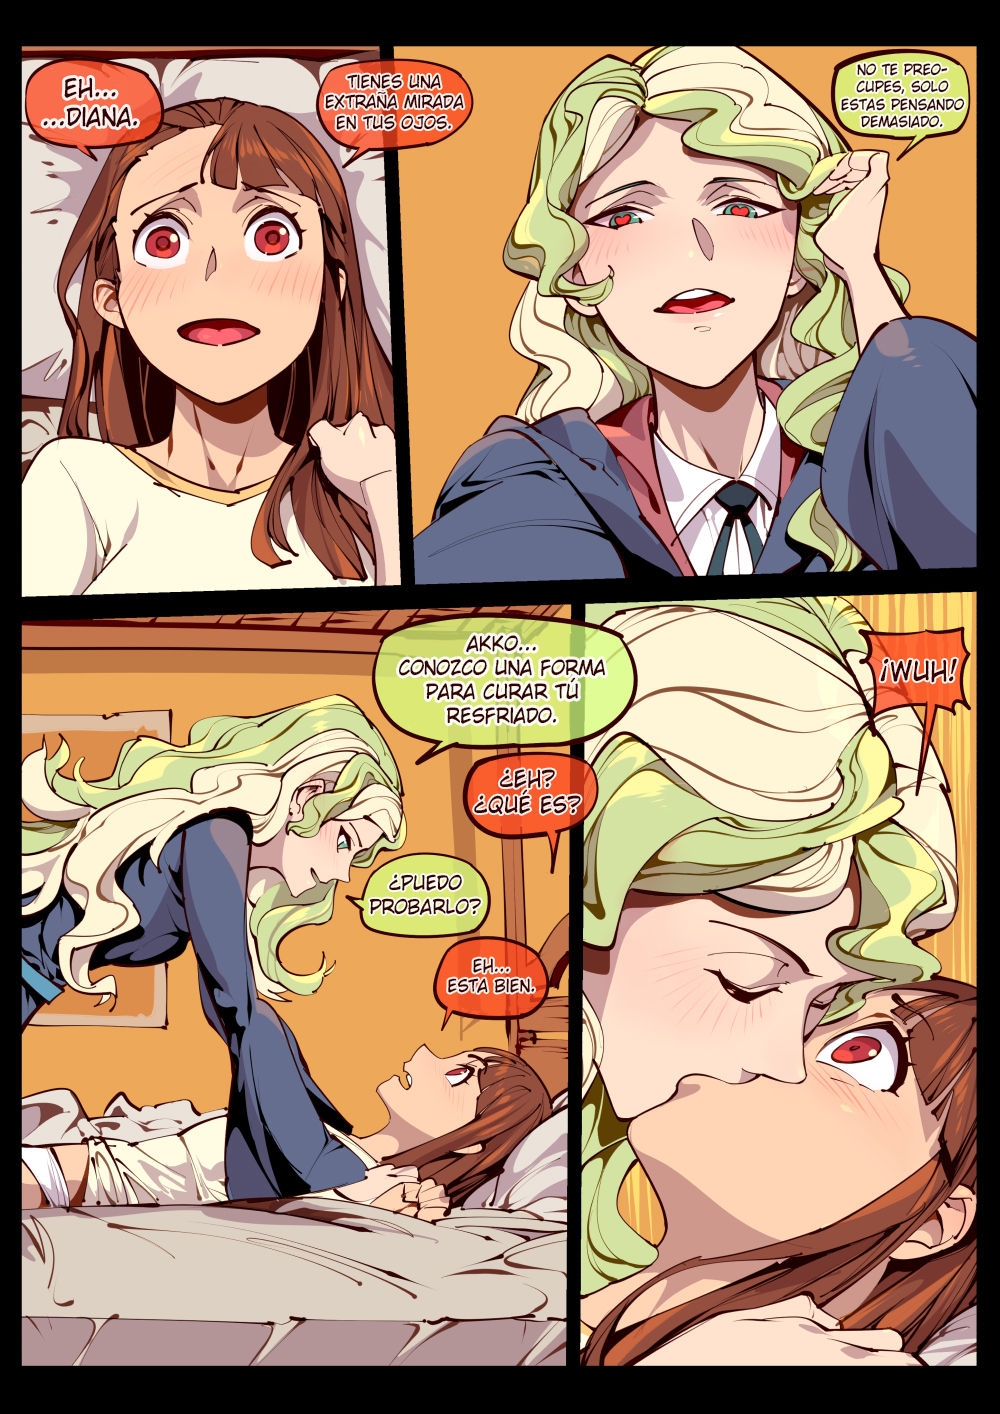 [Breakrabbit] Little Witch no Koi | Little witch love (Little Witch Academia) [Spanish] 4